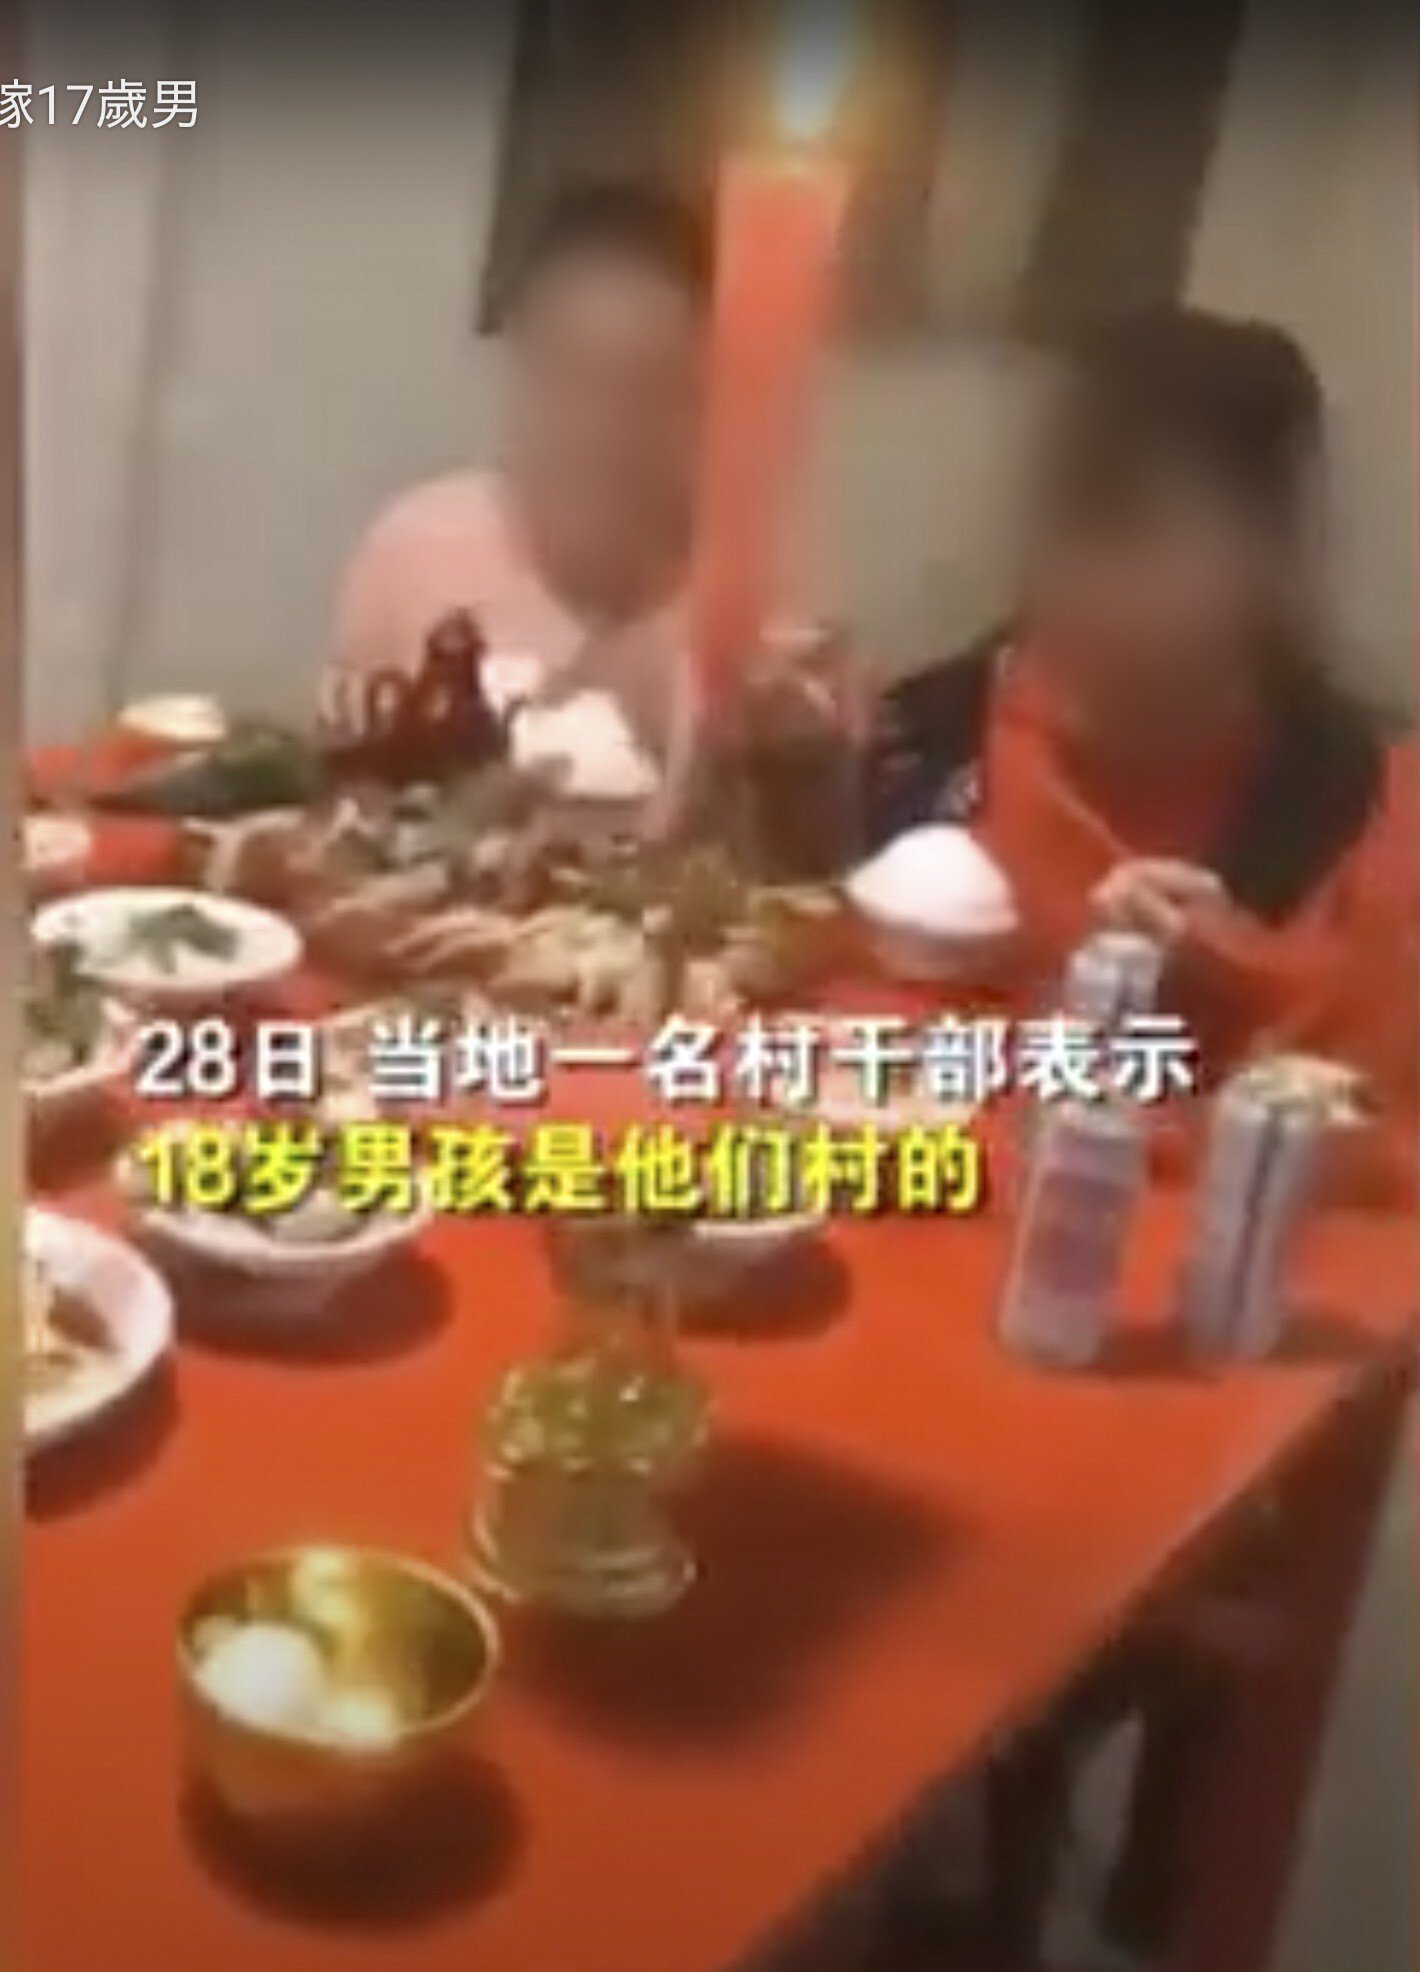 A still from a viral video clip showing a 17-year-old boy and 13-year-old girl taking part in a formal wedding ceremony in Shantou, Guangdong province, China. Photo: YouTube